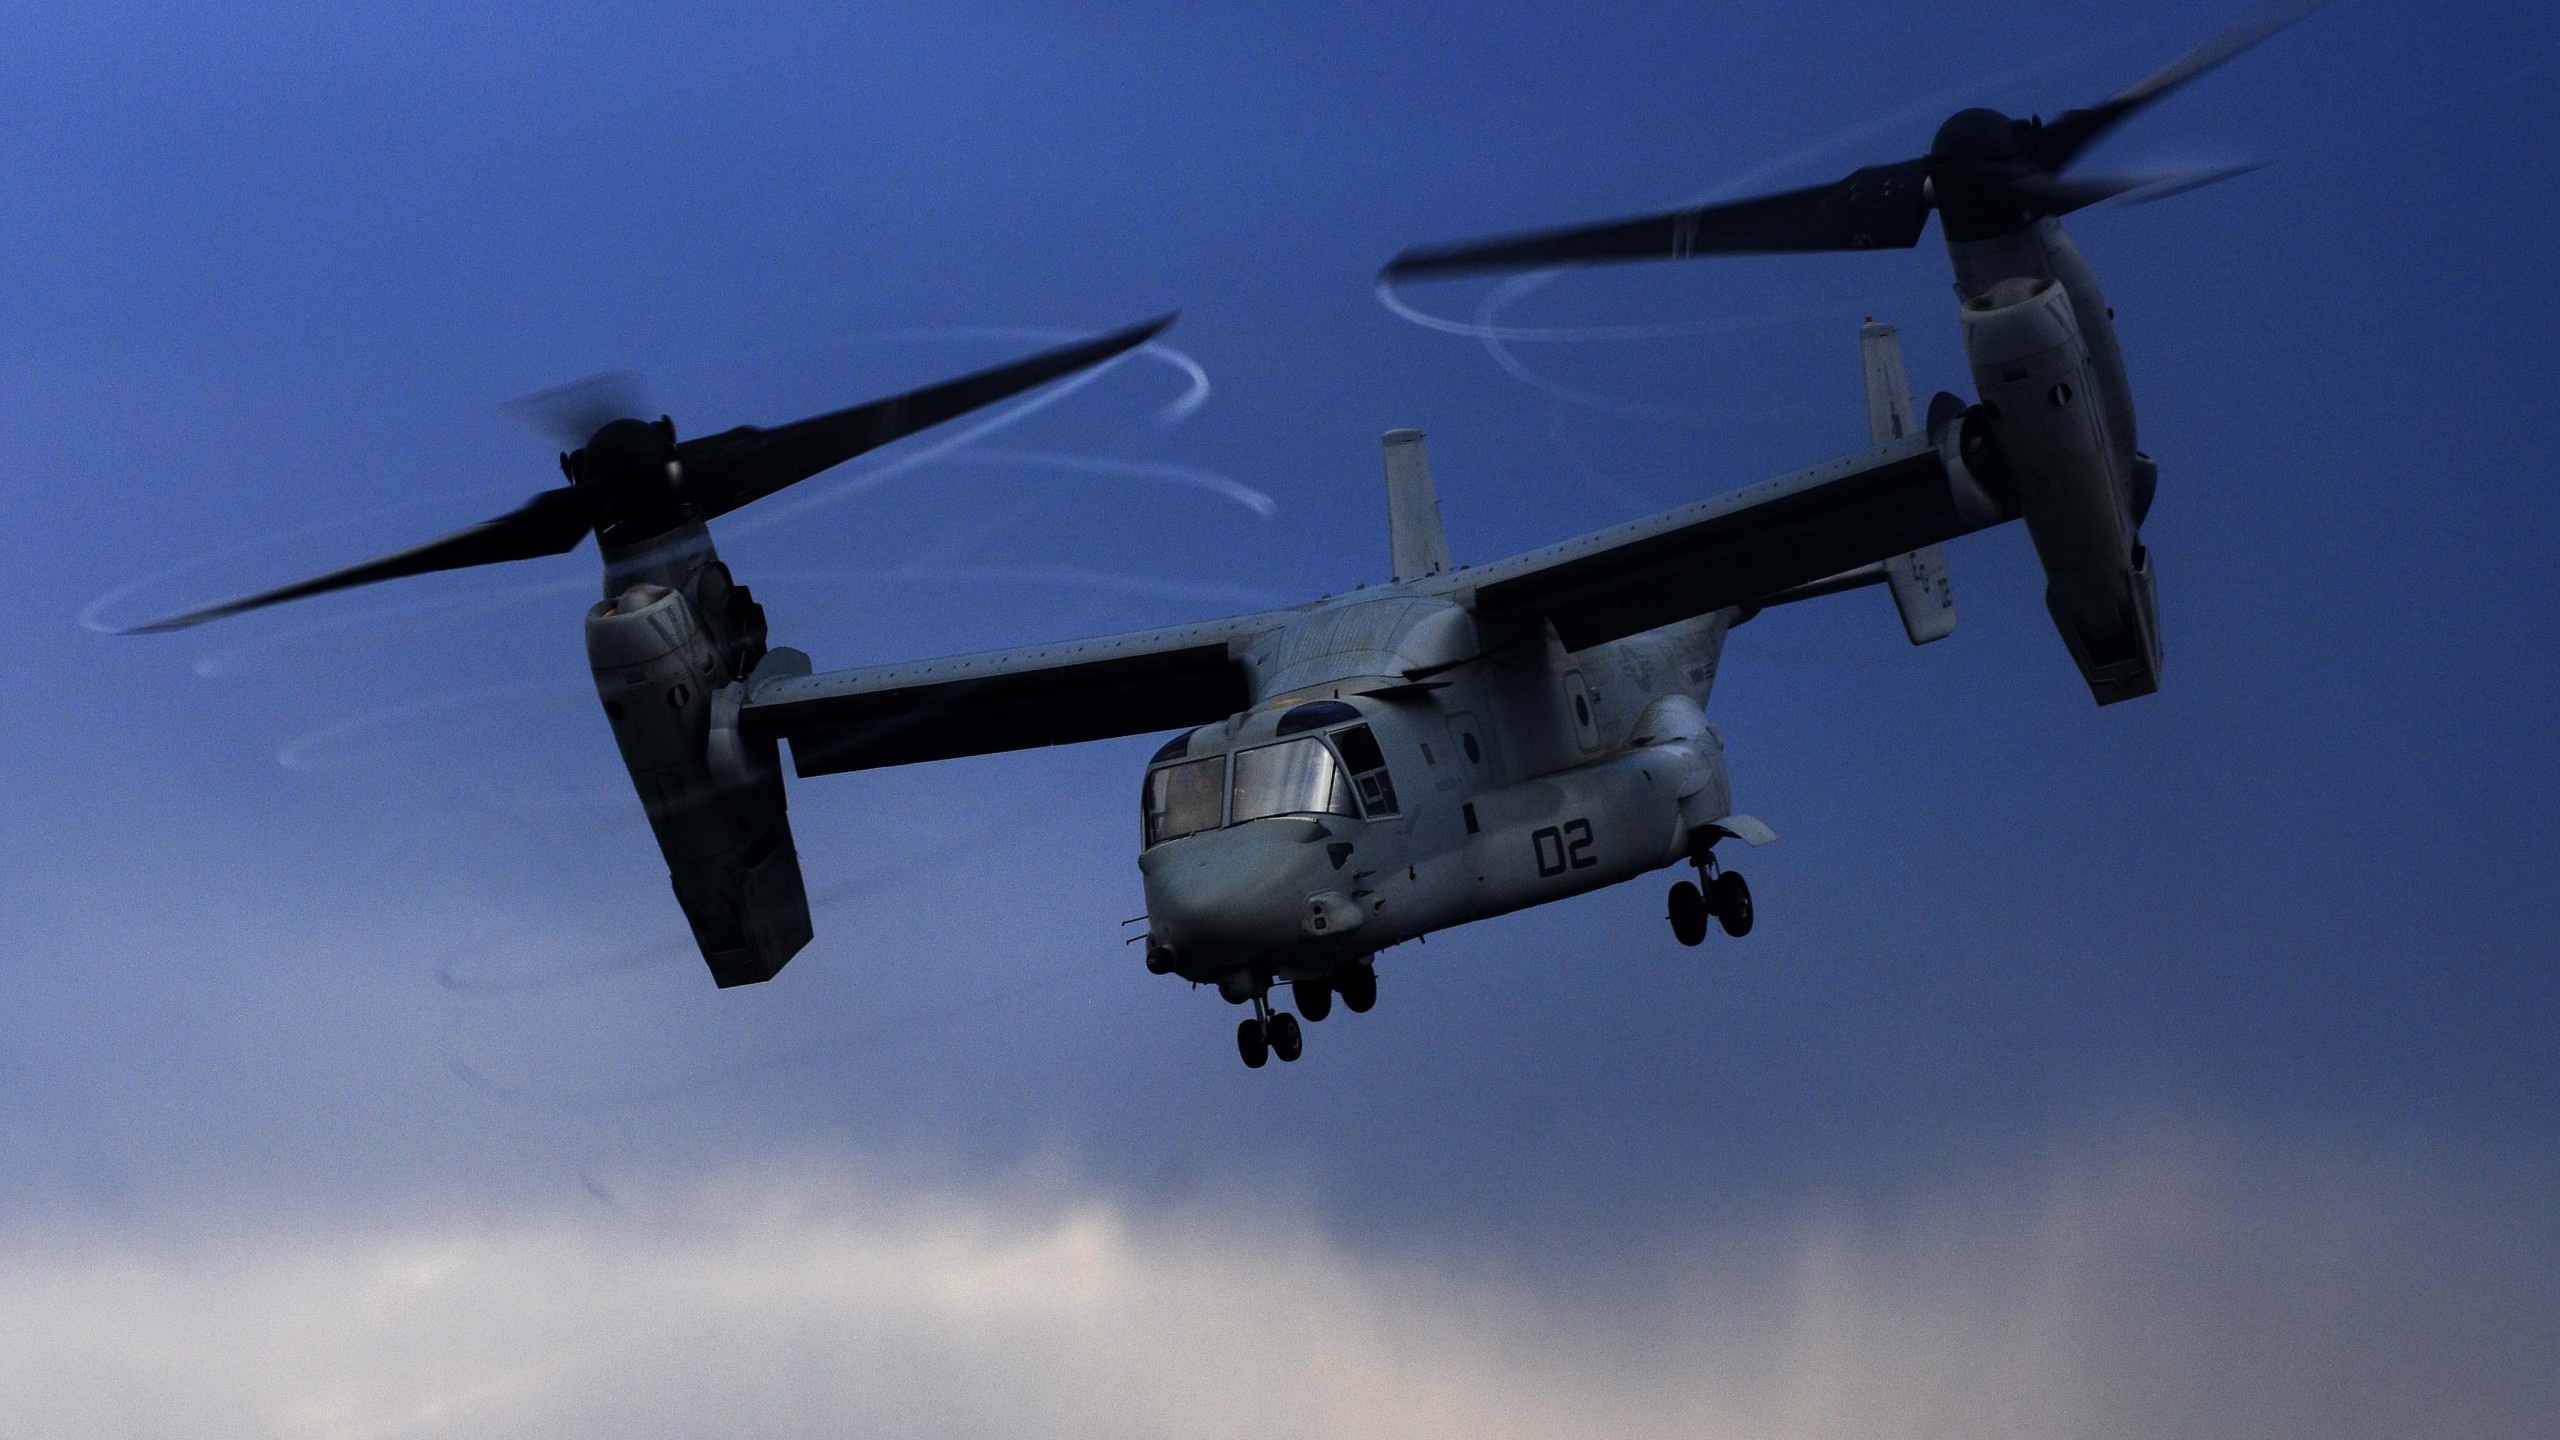 V-22 Osprey, Tiltrotor aircraft, Military power, Air Force missions, 2560x1440 HD Desktop